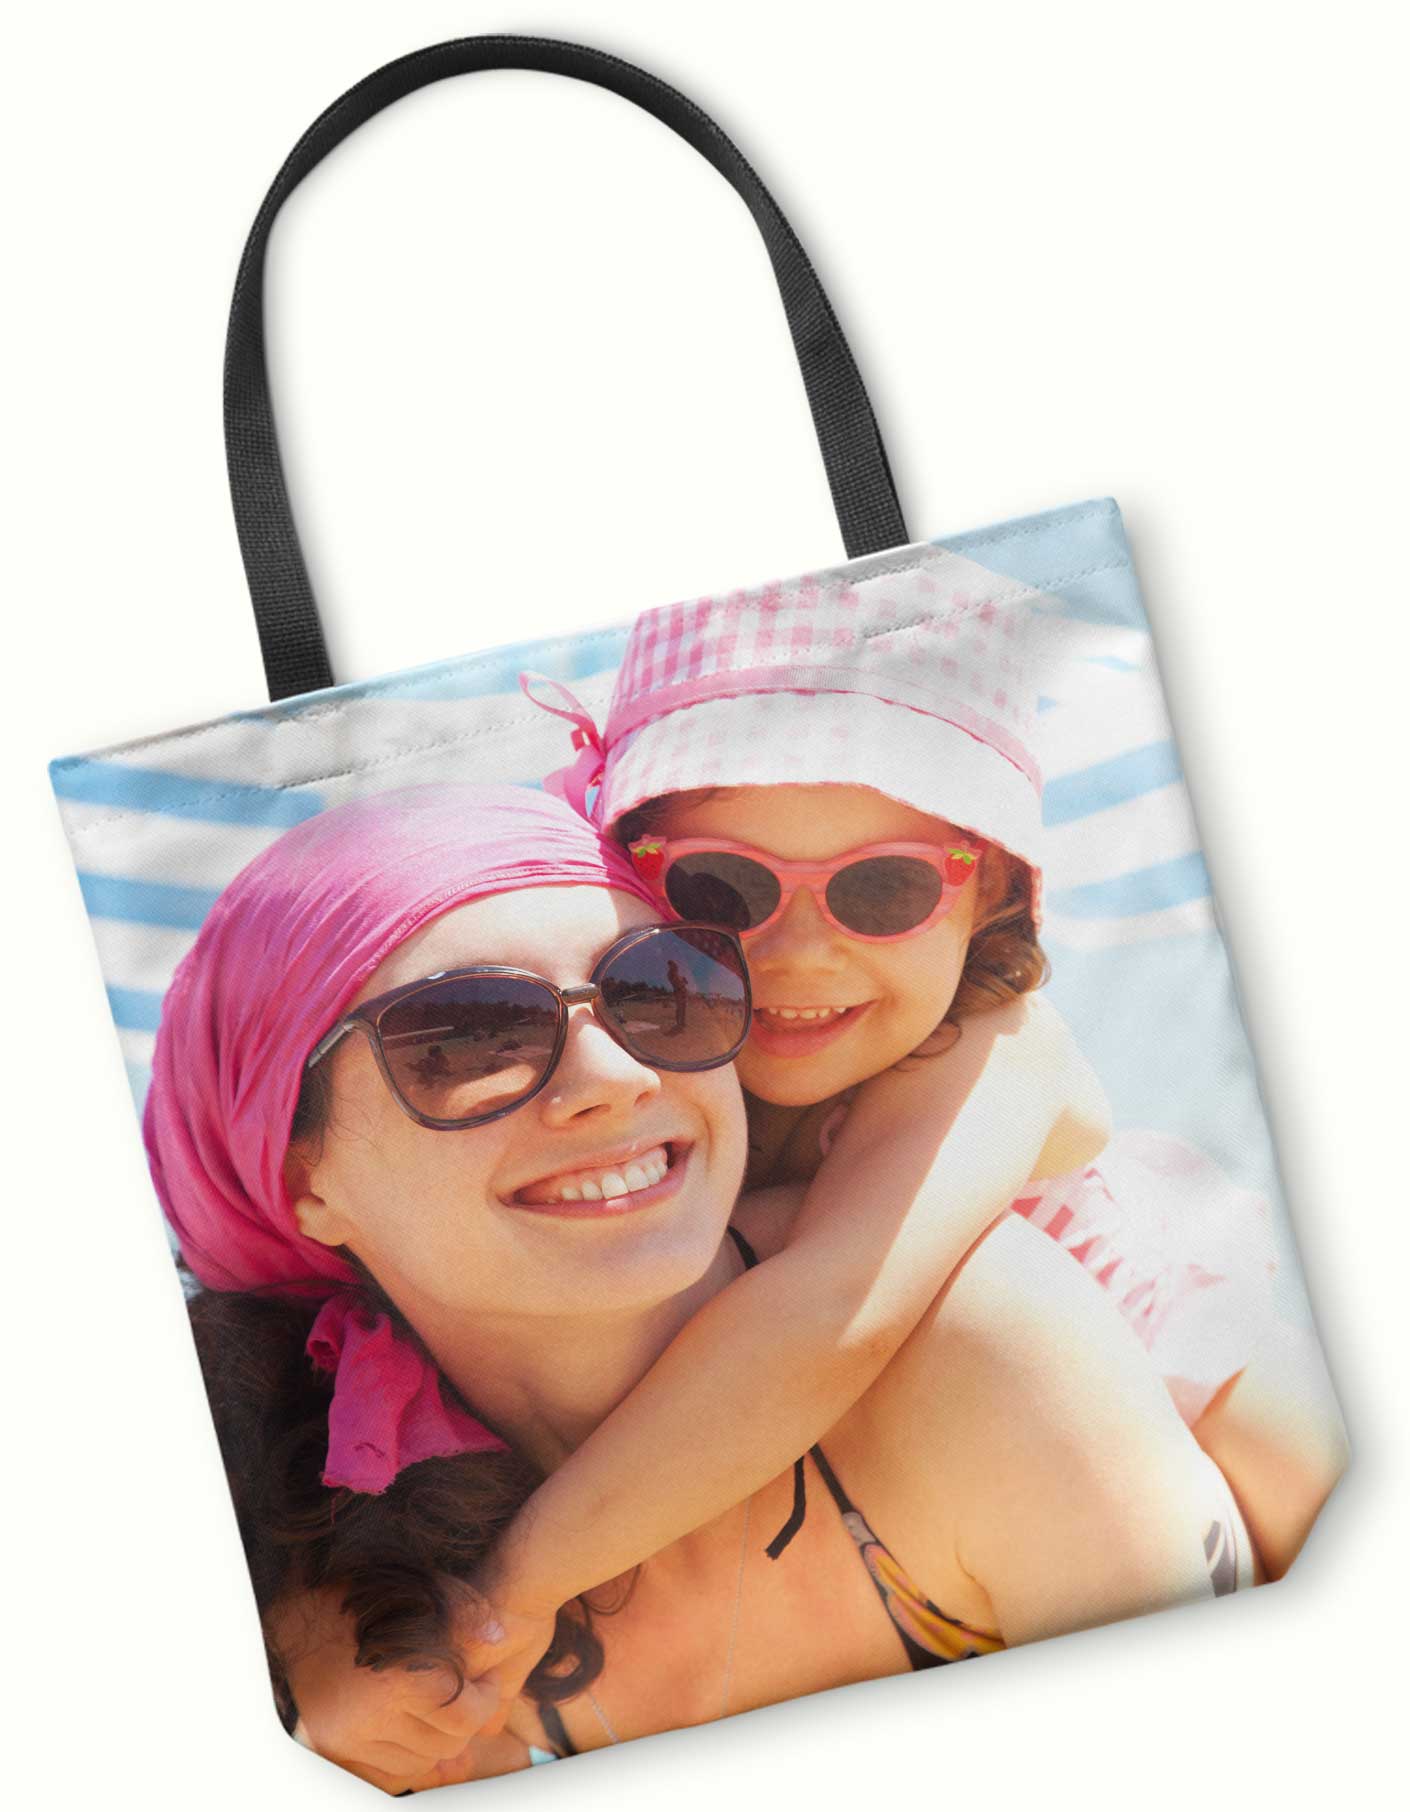 Courage & Strength Photo Tote Bag - 10% Donated To Fight Breast Cancer